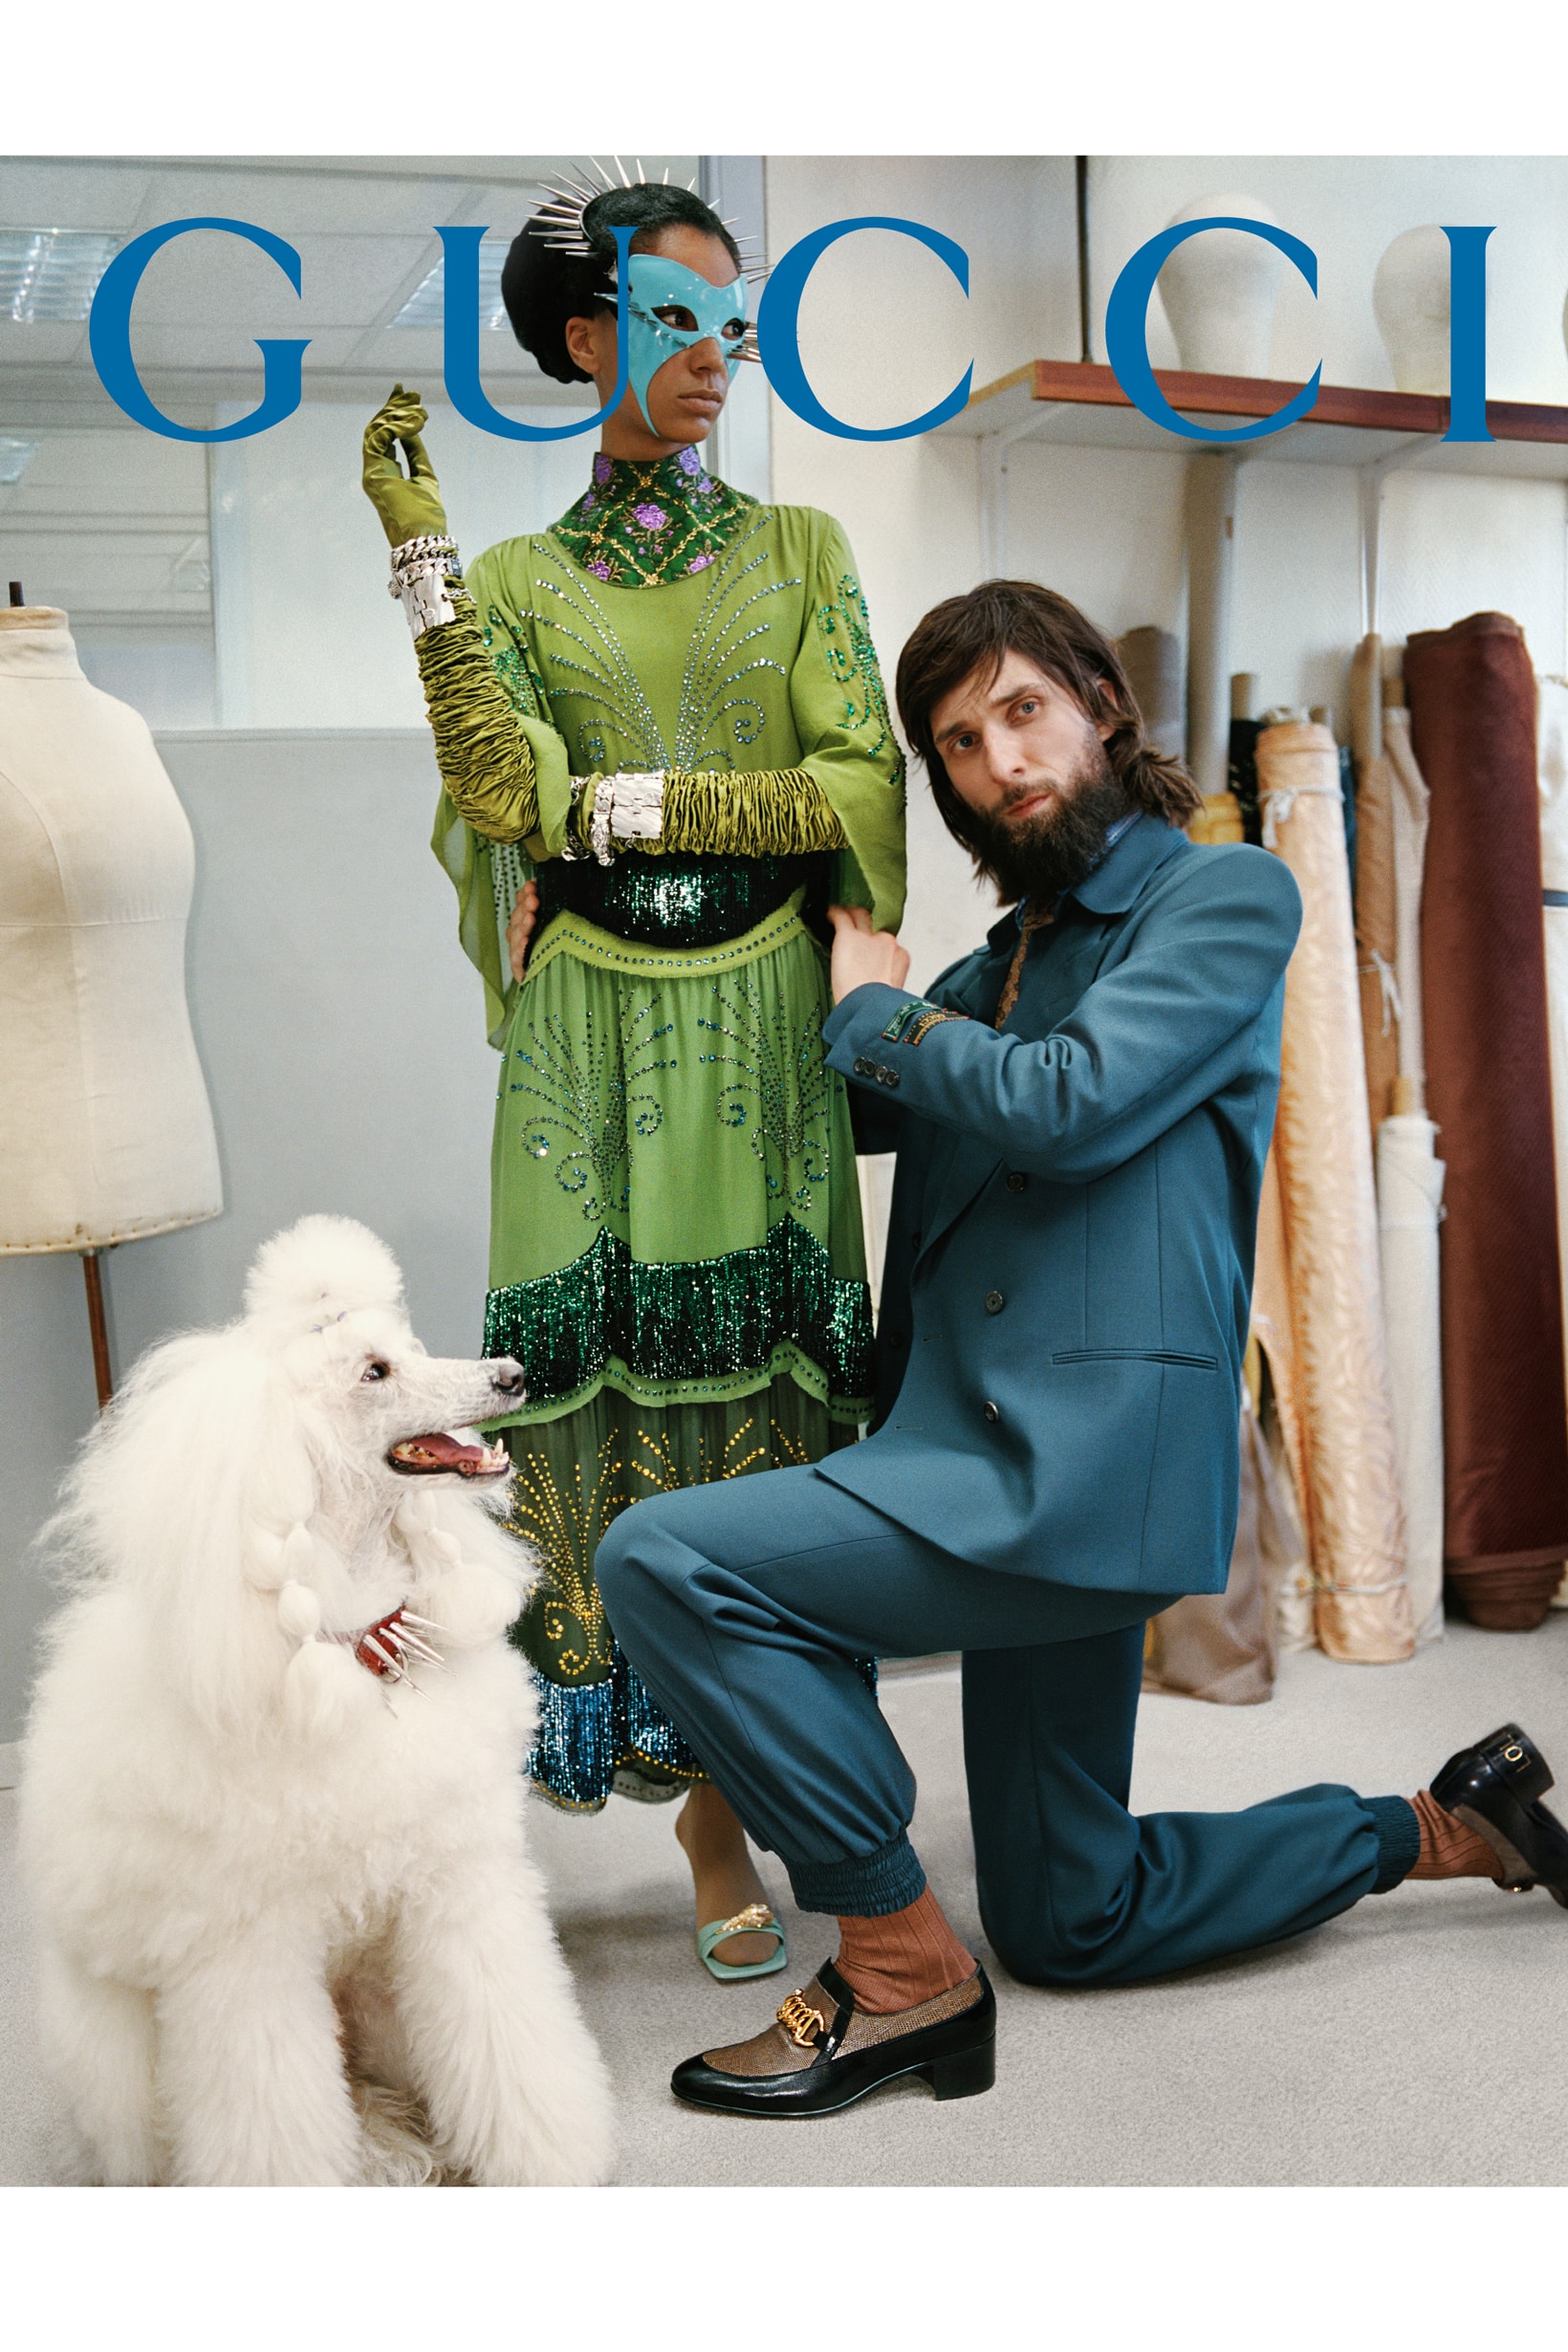 GucciPretAPorter Fall Winter 2019 Campaign Dress Green Suit Blue